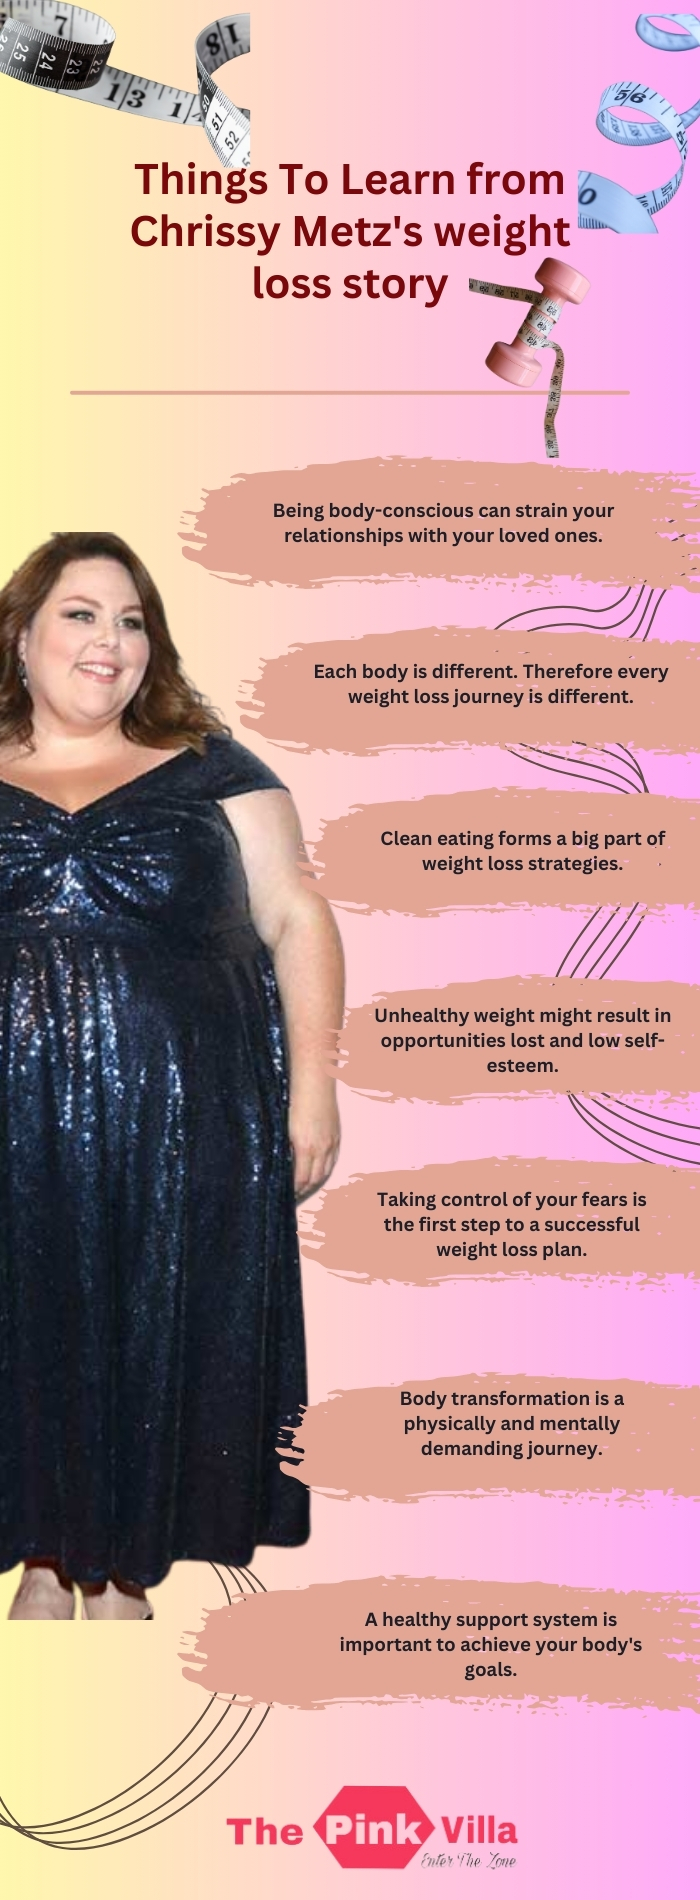 Things to learn from Chrissy Metz's weight loss story